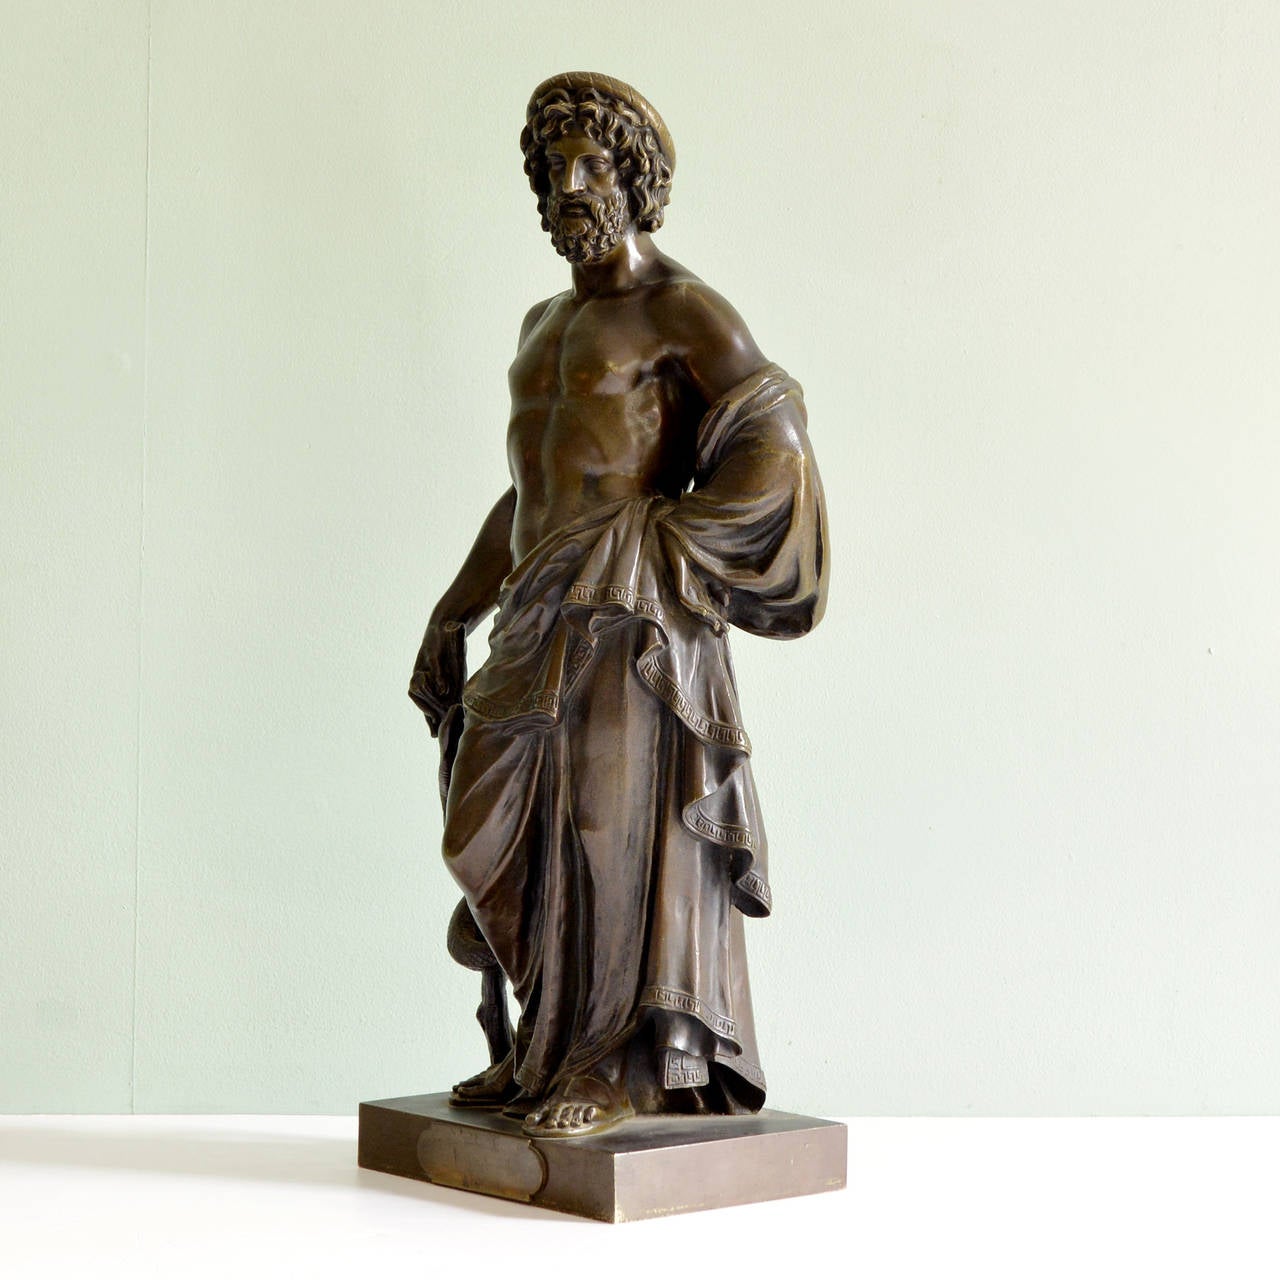 A French bronze of Asclepius, circa 1830, by Pierre Robinet.

Available to view at Brunswick House, London.

50cm high, 18.5cm wide, 13.5cm deep.